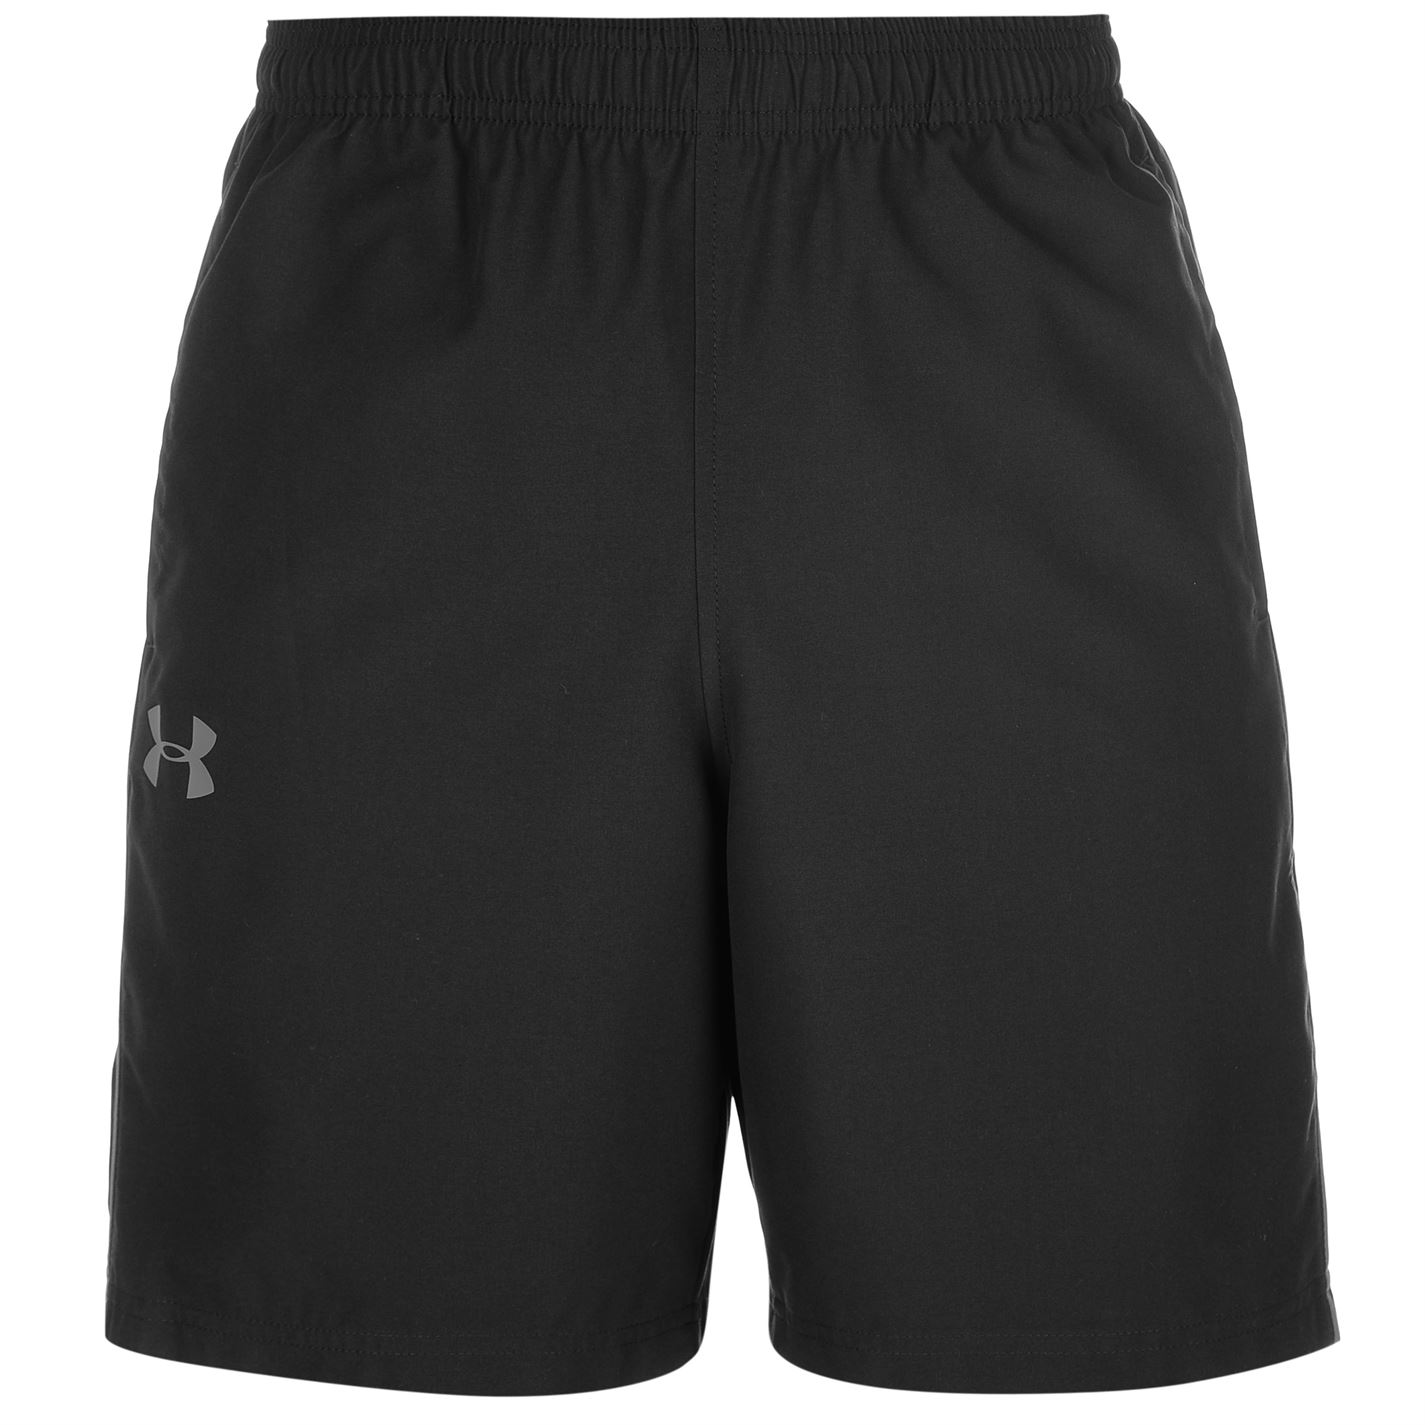 Under Armour Core Woven Shorts Mens